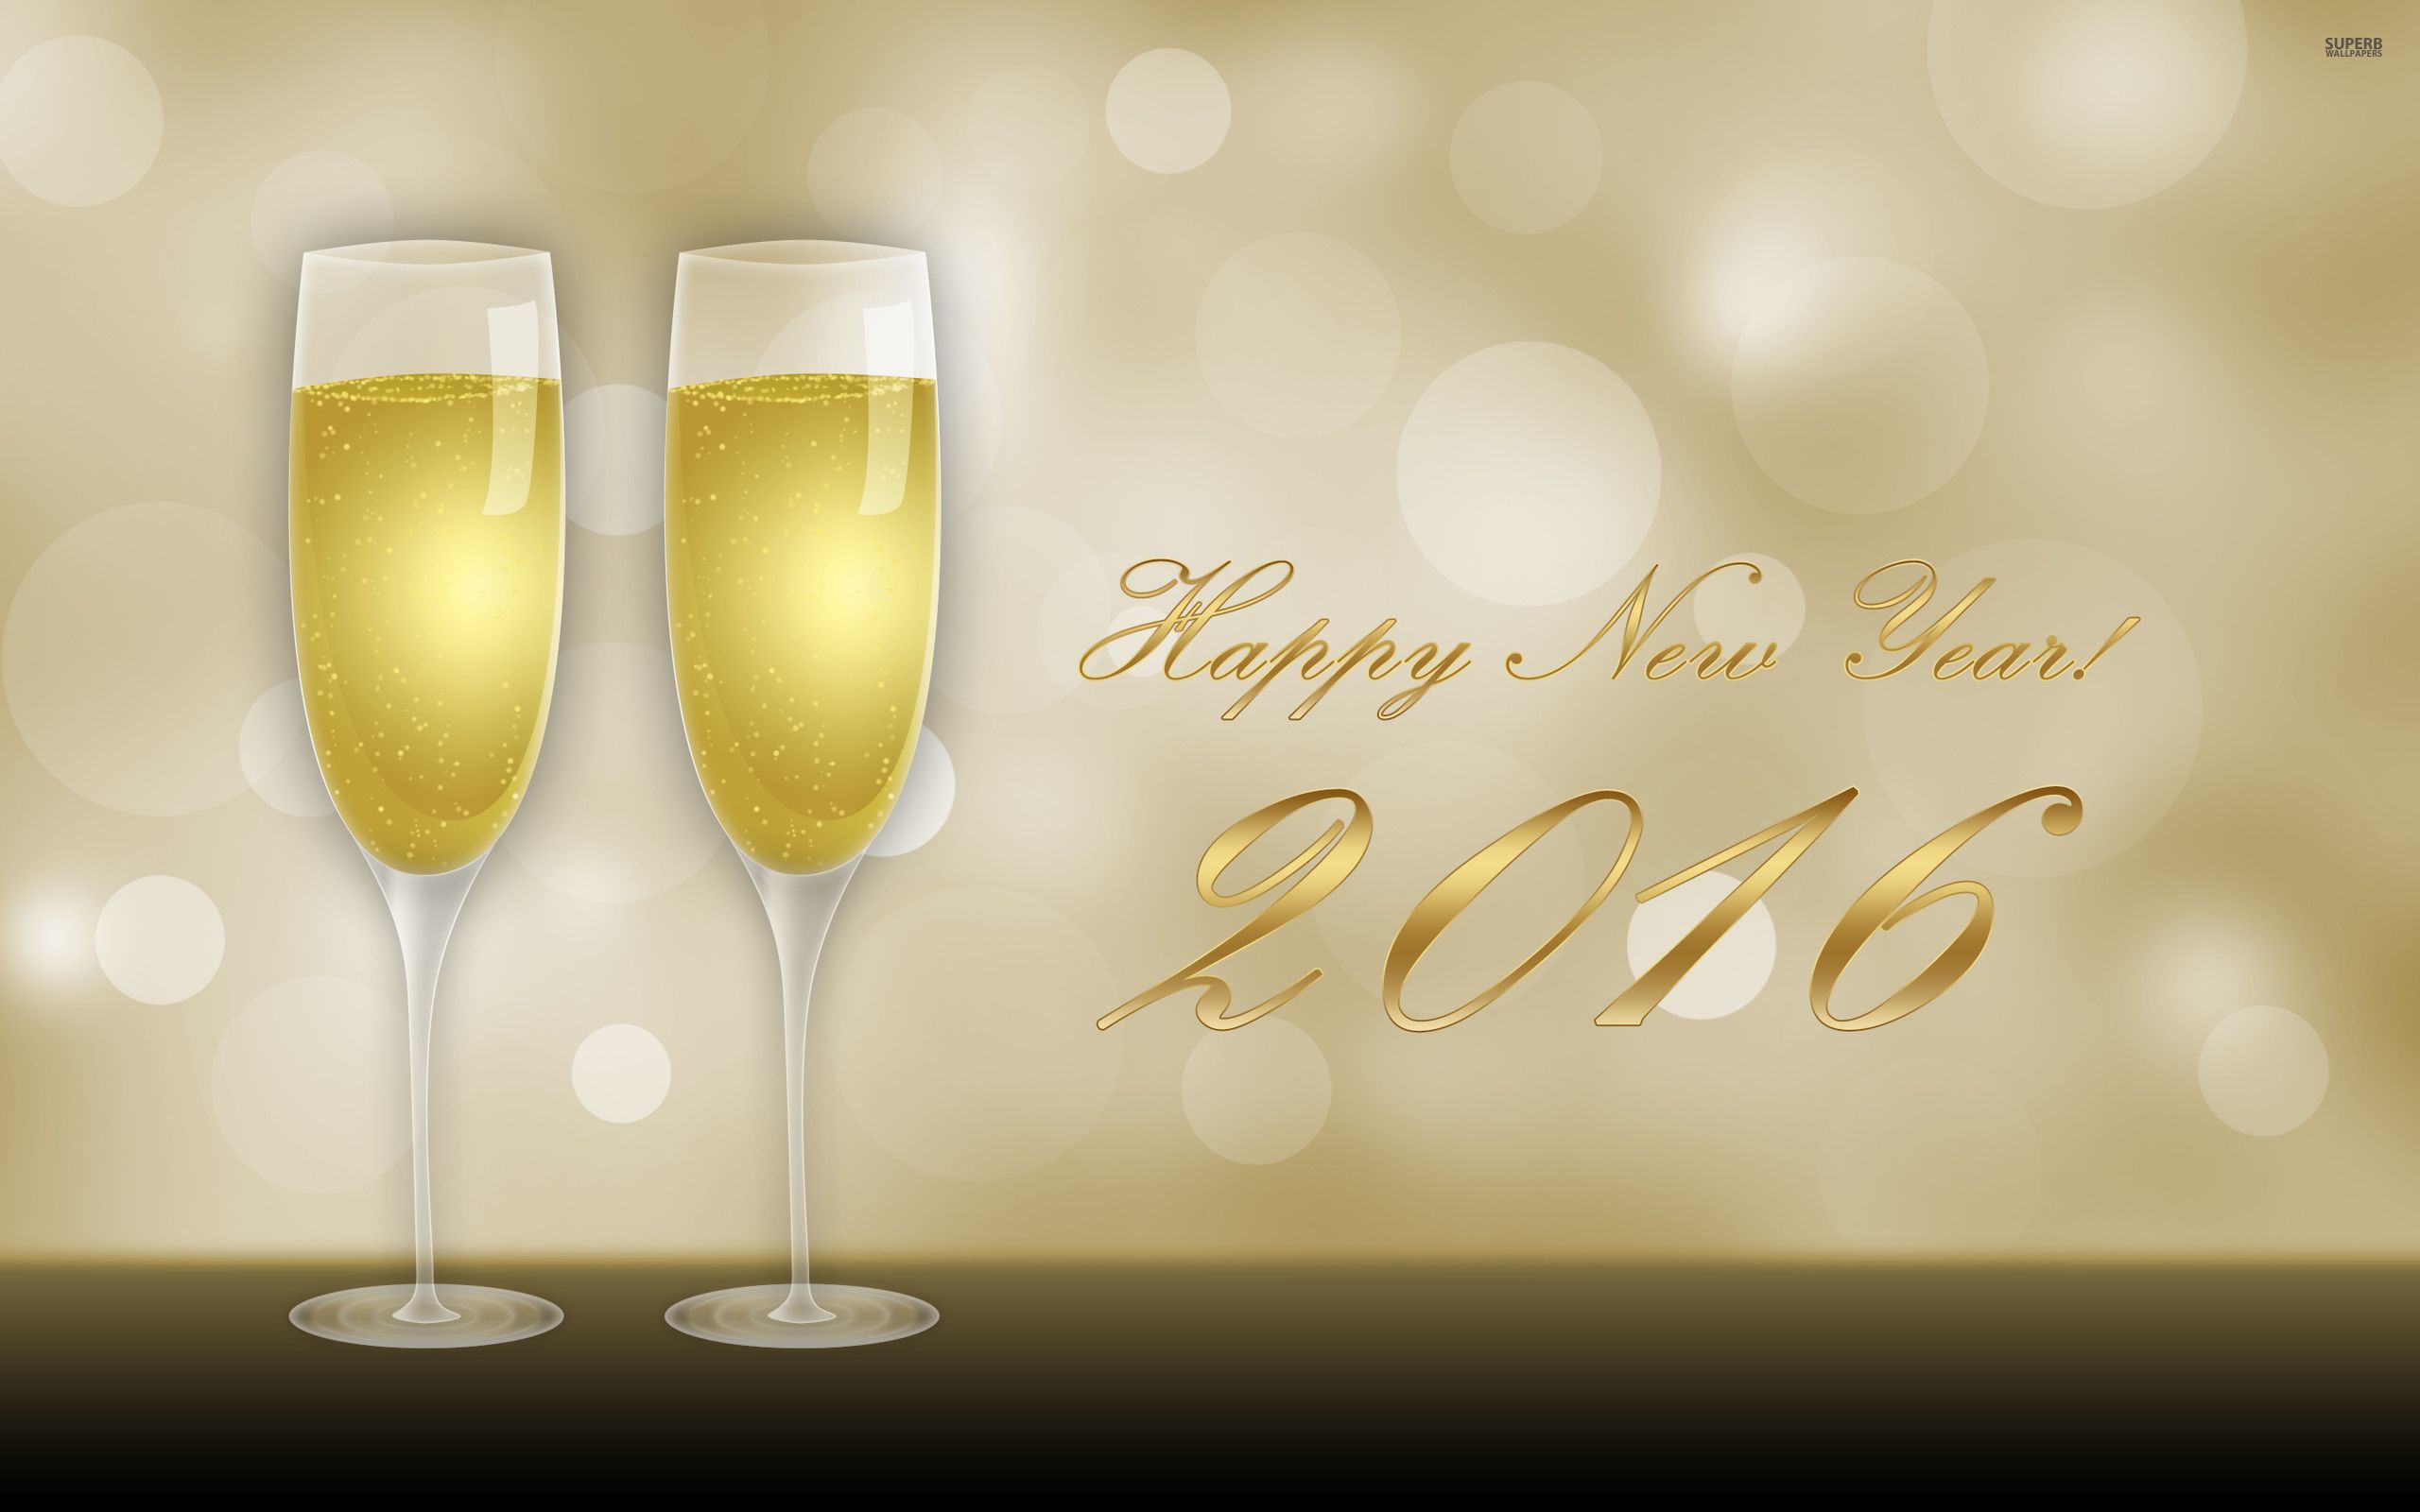 Champagne glasses on New Year's Eve wallpaper - Holiday wallpapers ...